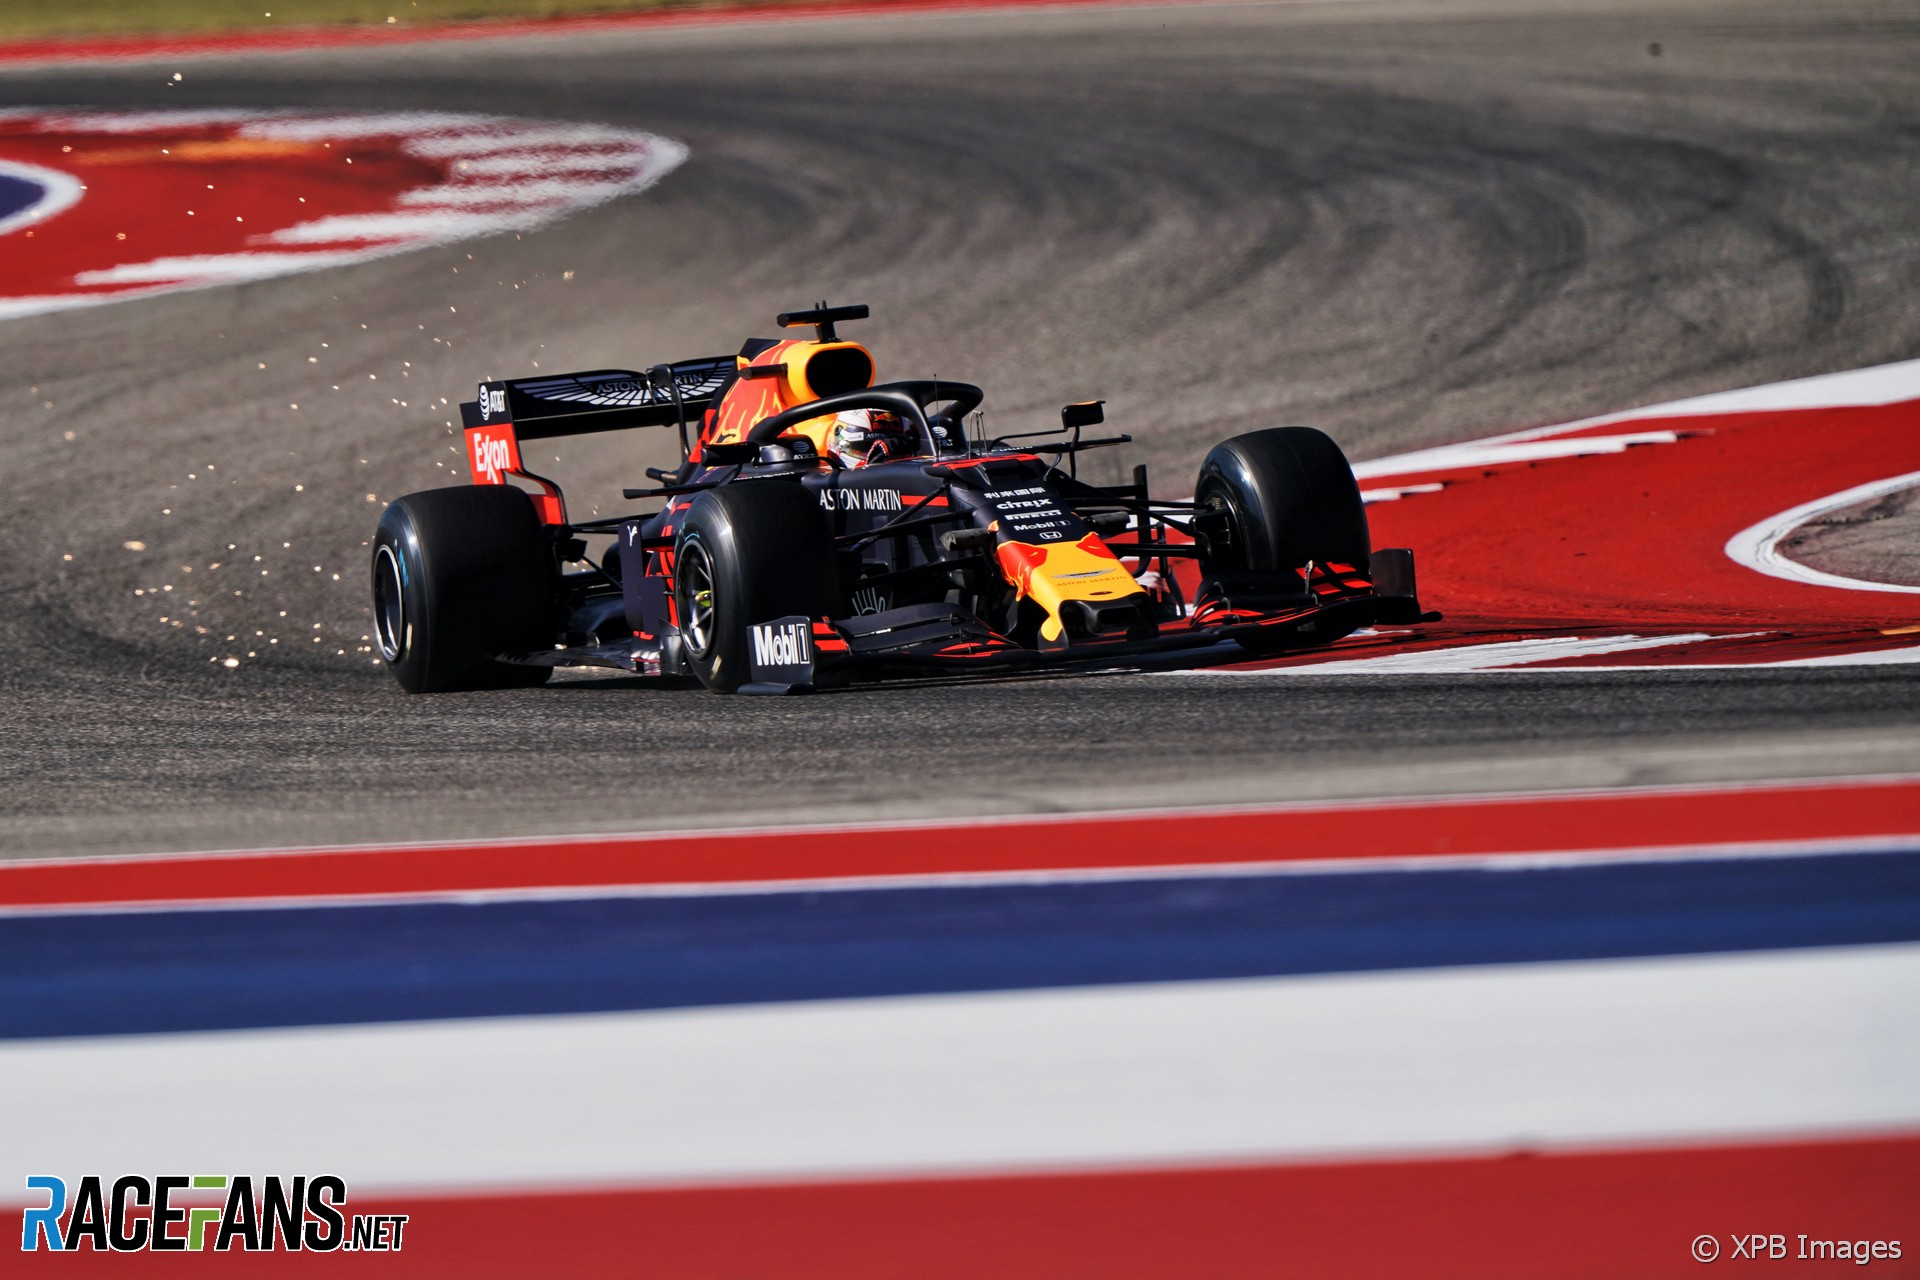 Max Verstappen, Red Bull, Circuit of the Americas, 2019